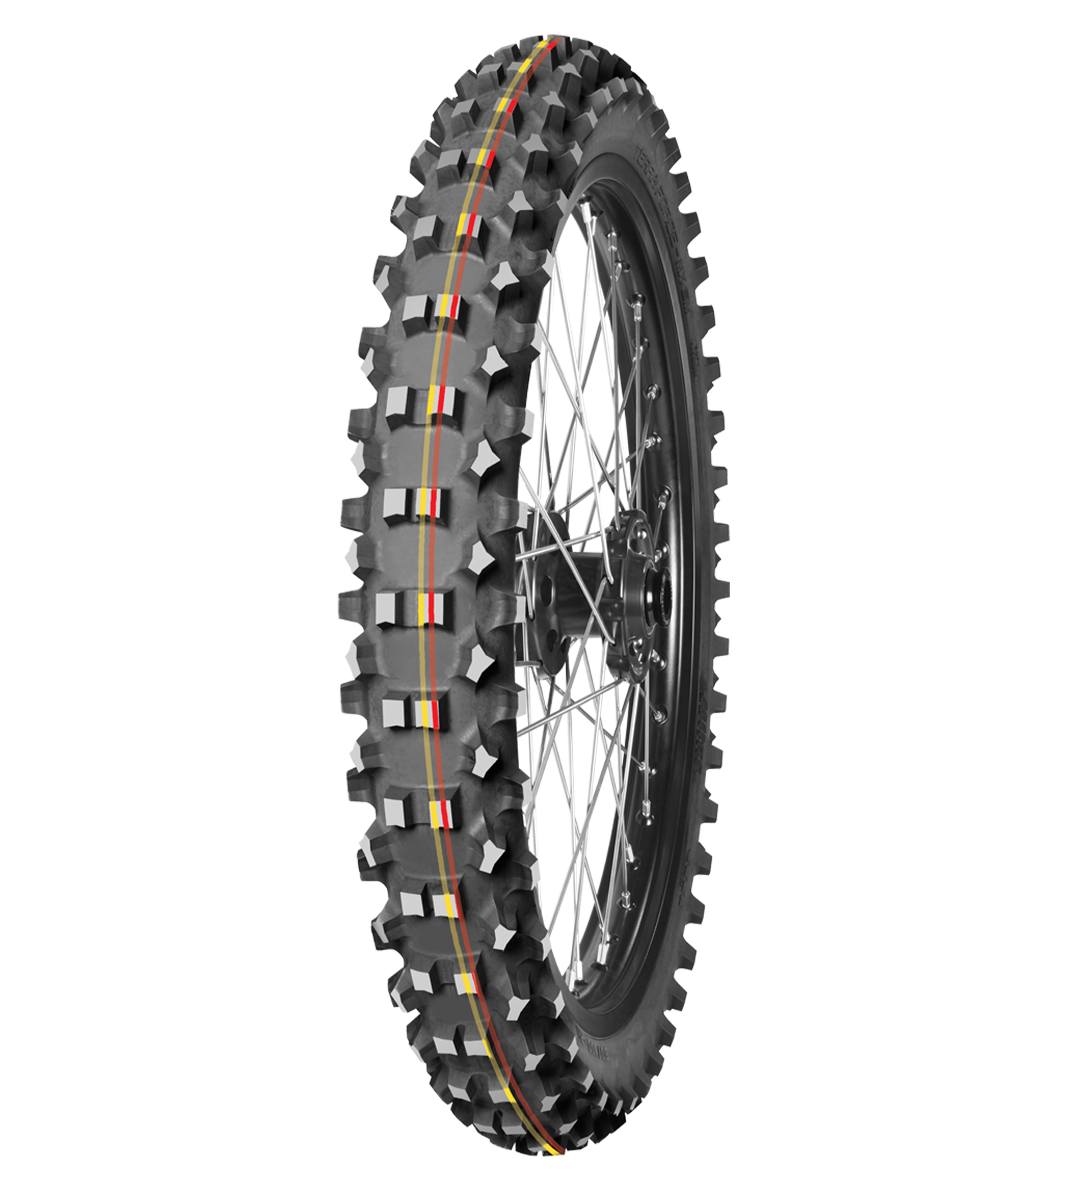 Mitas TERRA FORCE-MX SM 70/100-17 Motocross Competition Off-Road SOFT TO MEDIUM 40M Red & Yellow Tube Front Tire, 226161, 70/100-17, Front, Motocross, Motocross Competition, Off-Road, Terra Force, Terra Force-MX SM, Trail, Tires - Imported and distributed in North & South America by Lindeco Genuine Powersports - Premier Powersports Equipment and Accessories for Motorcycle Enthusiasts, Professional Riders and Dealers.